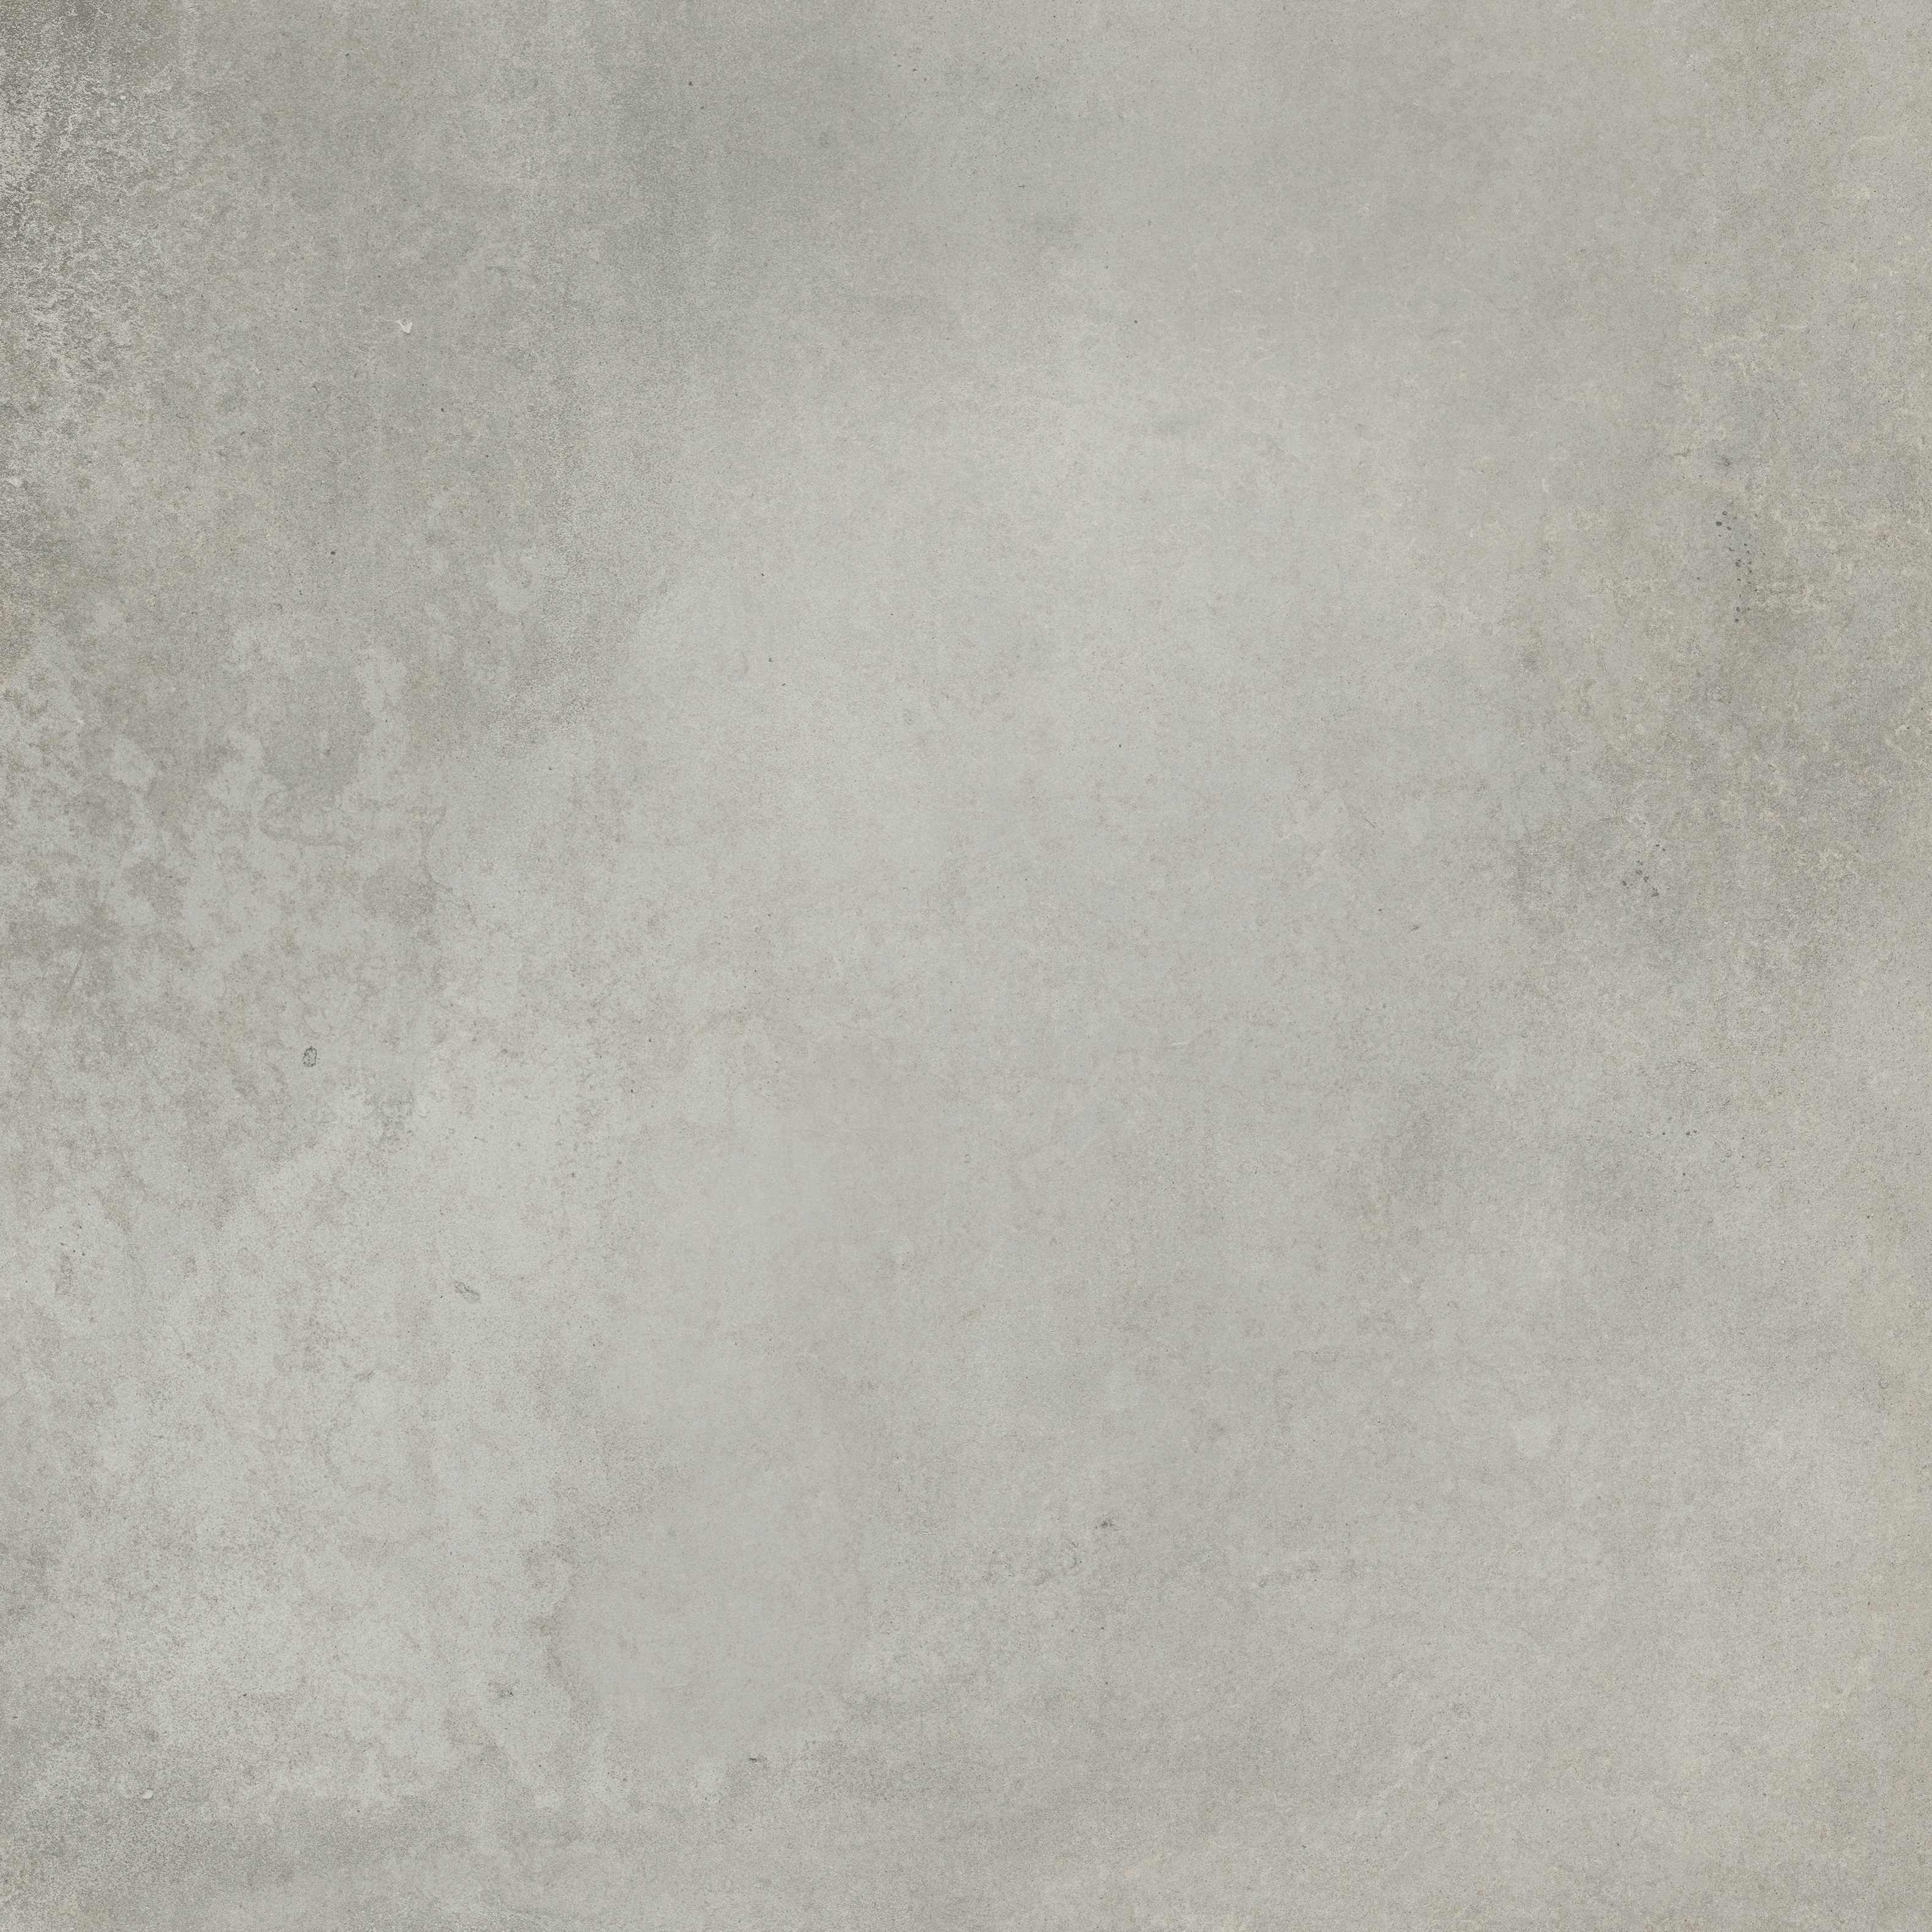 chromium pattern color body porcelain field tile from ceraforge anatolia collection distributed by surface group international matte finish rectified edge 24x24 square shape